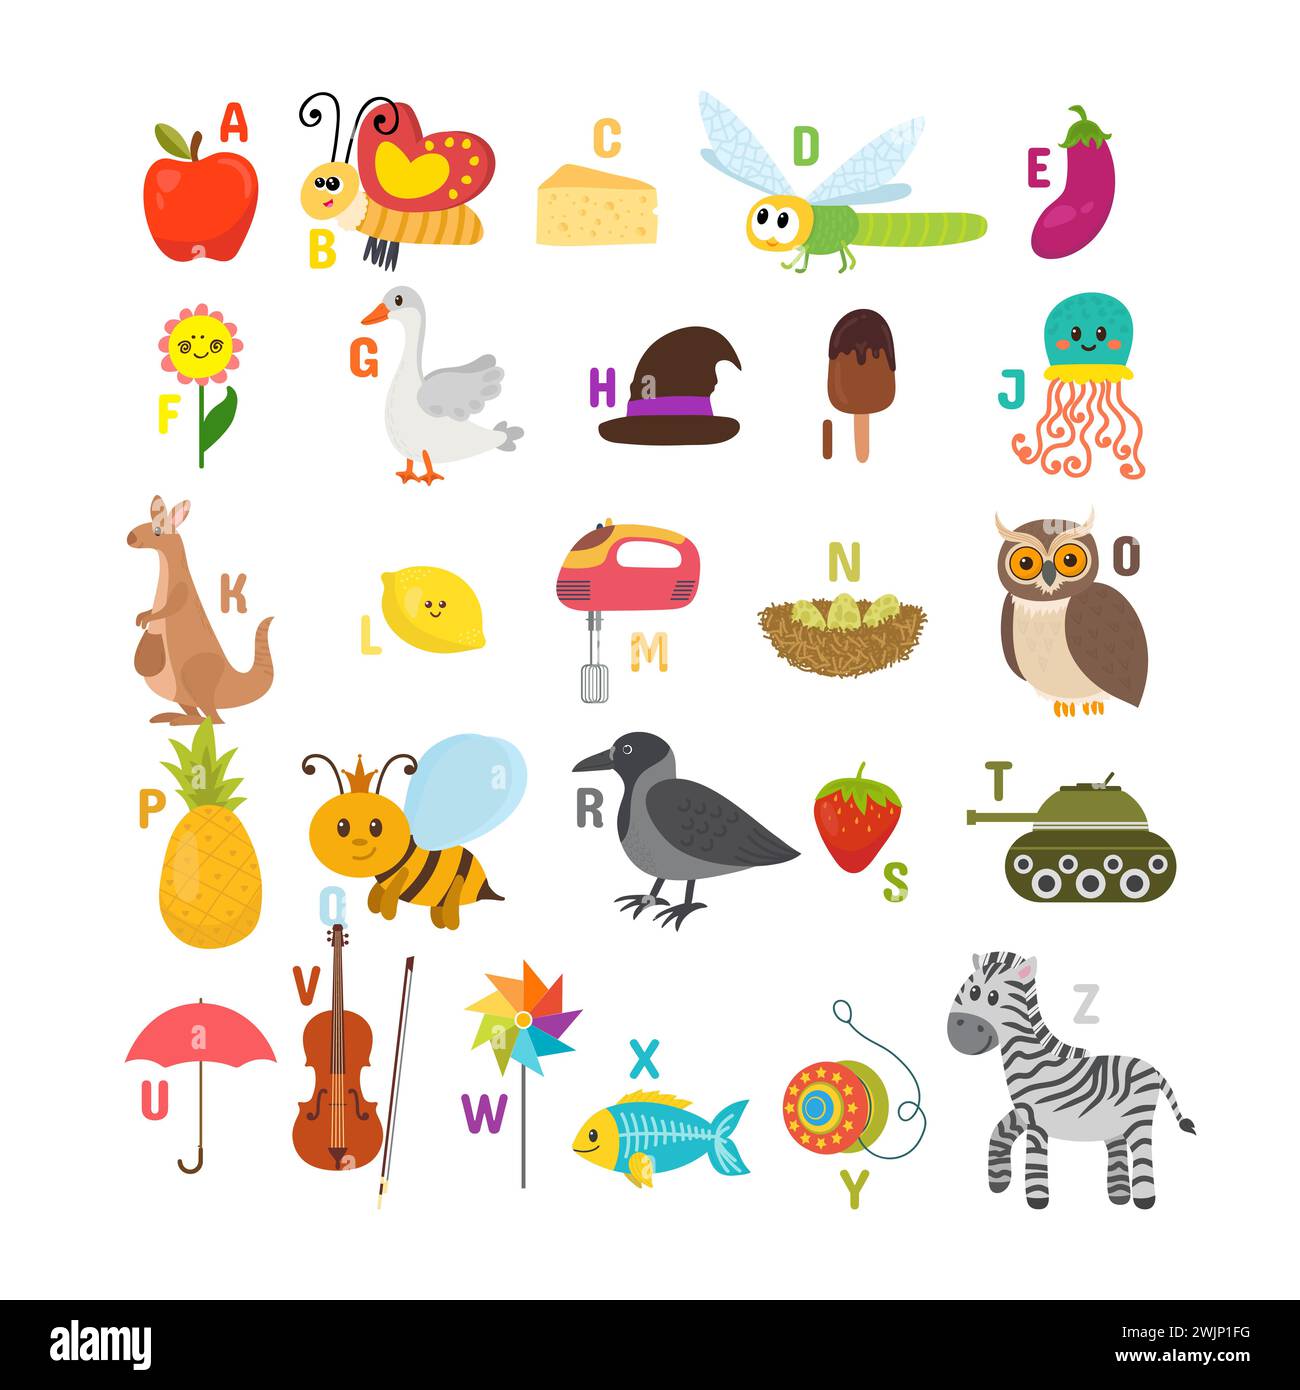 Learn to read. Children alphabet with cute cartoon animals and other funny elements. ABC. Vector illustration Stock Vector